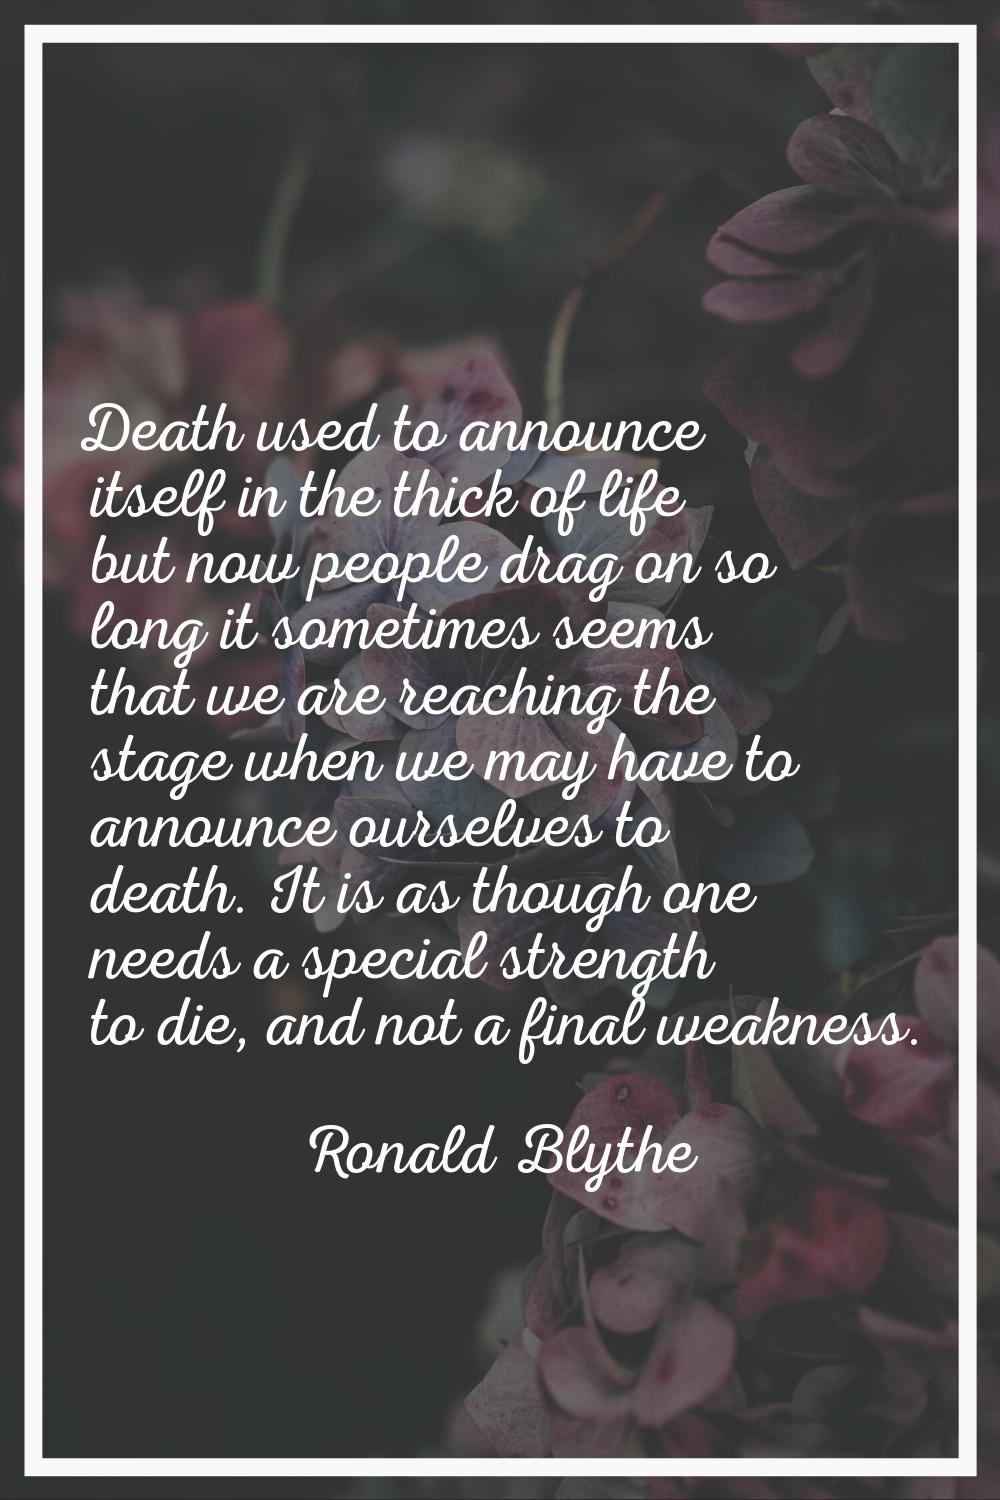 Death used to announce itself in the thick of life but now people drag on so long it sometimes seem